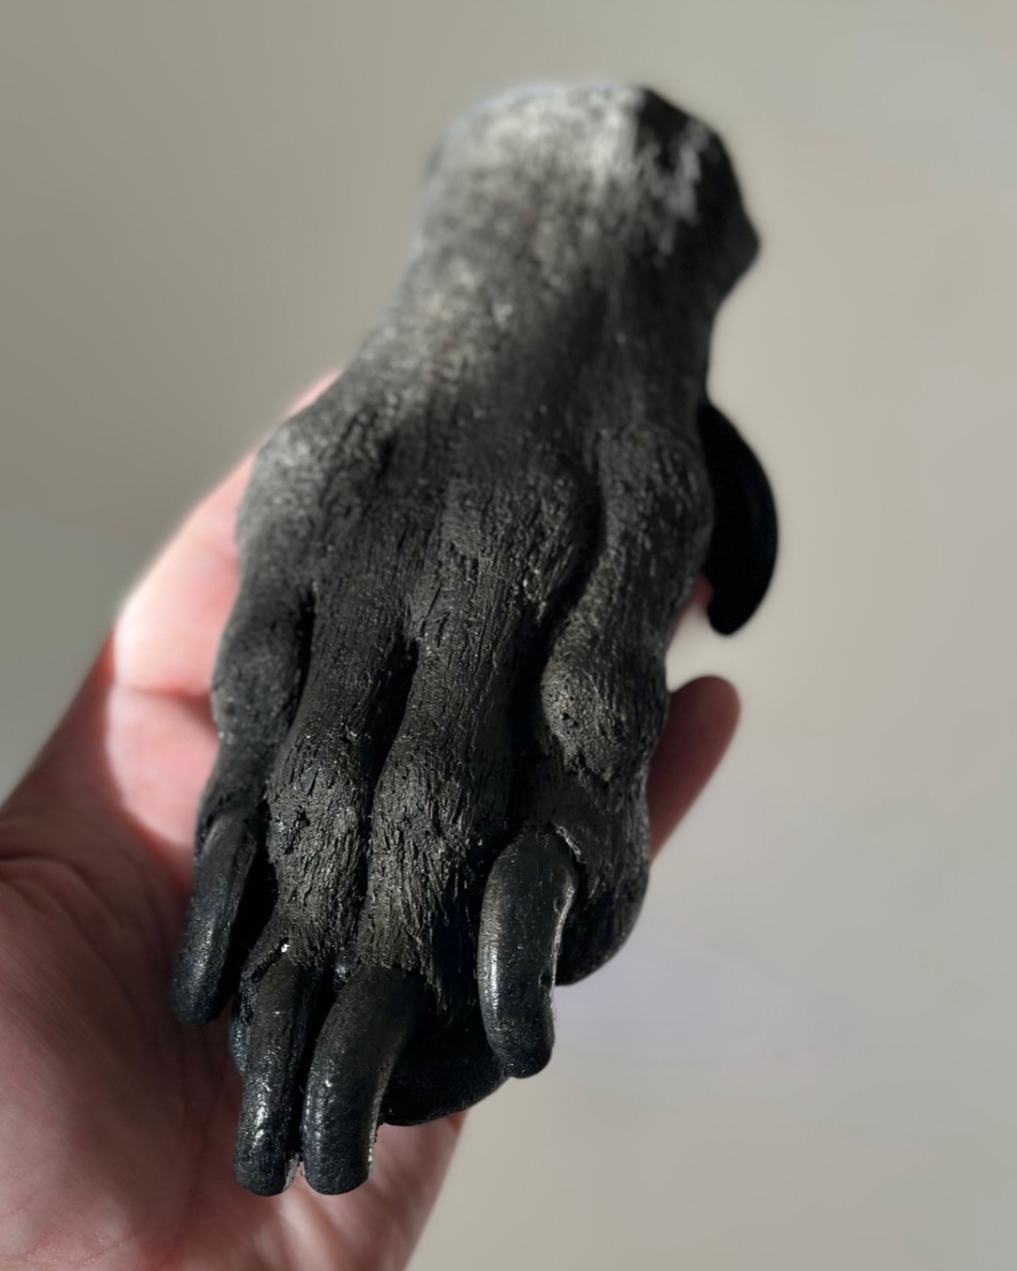 Cast of a large dog's paw being held by a person